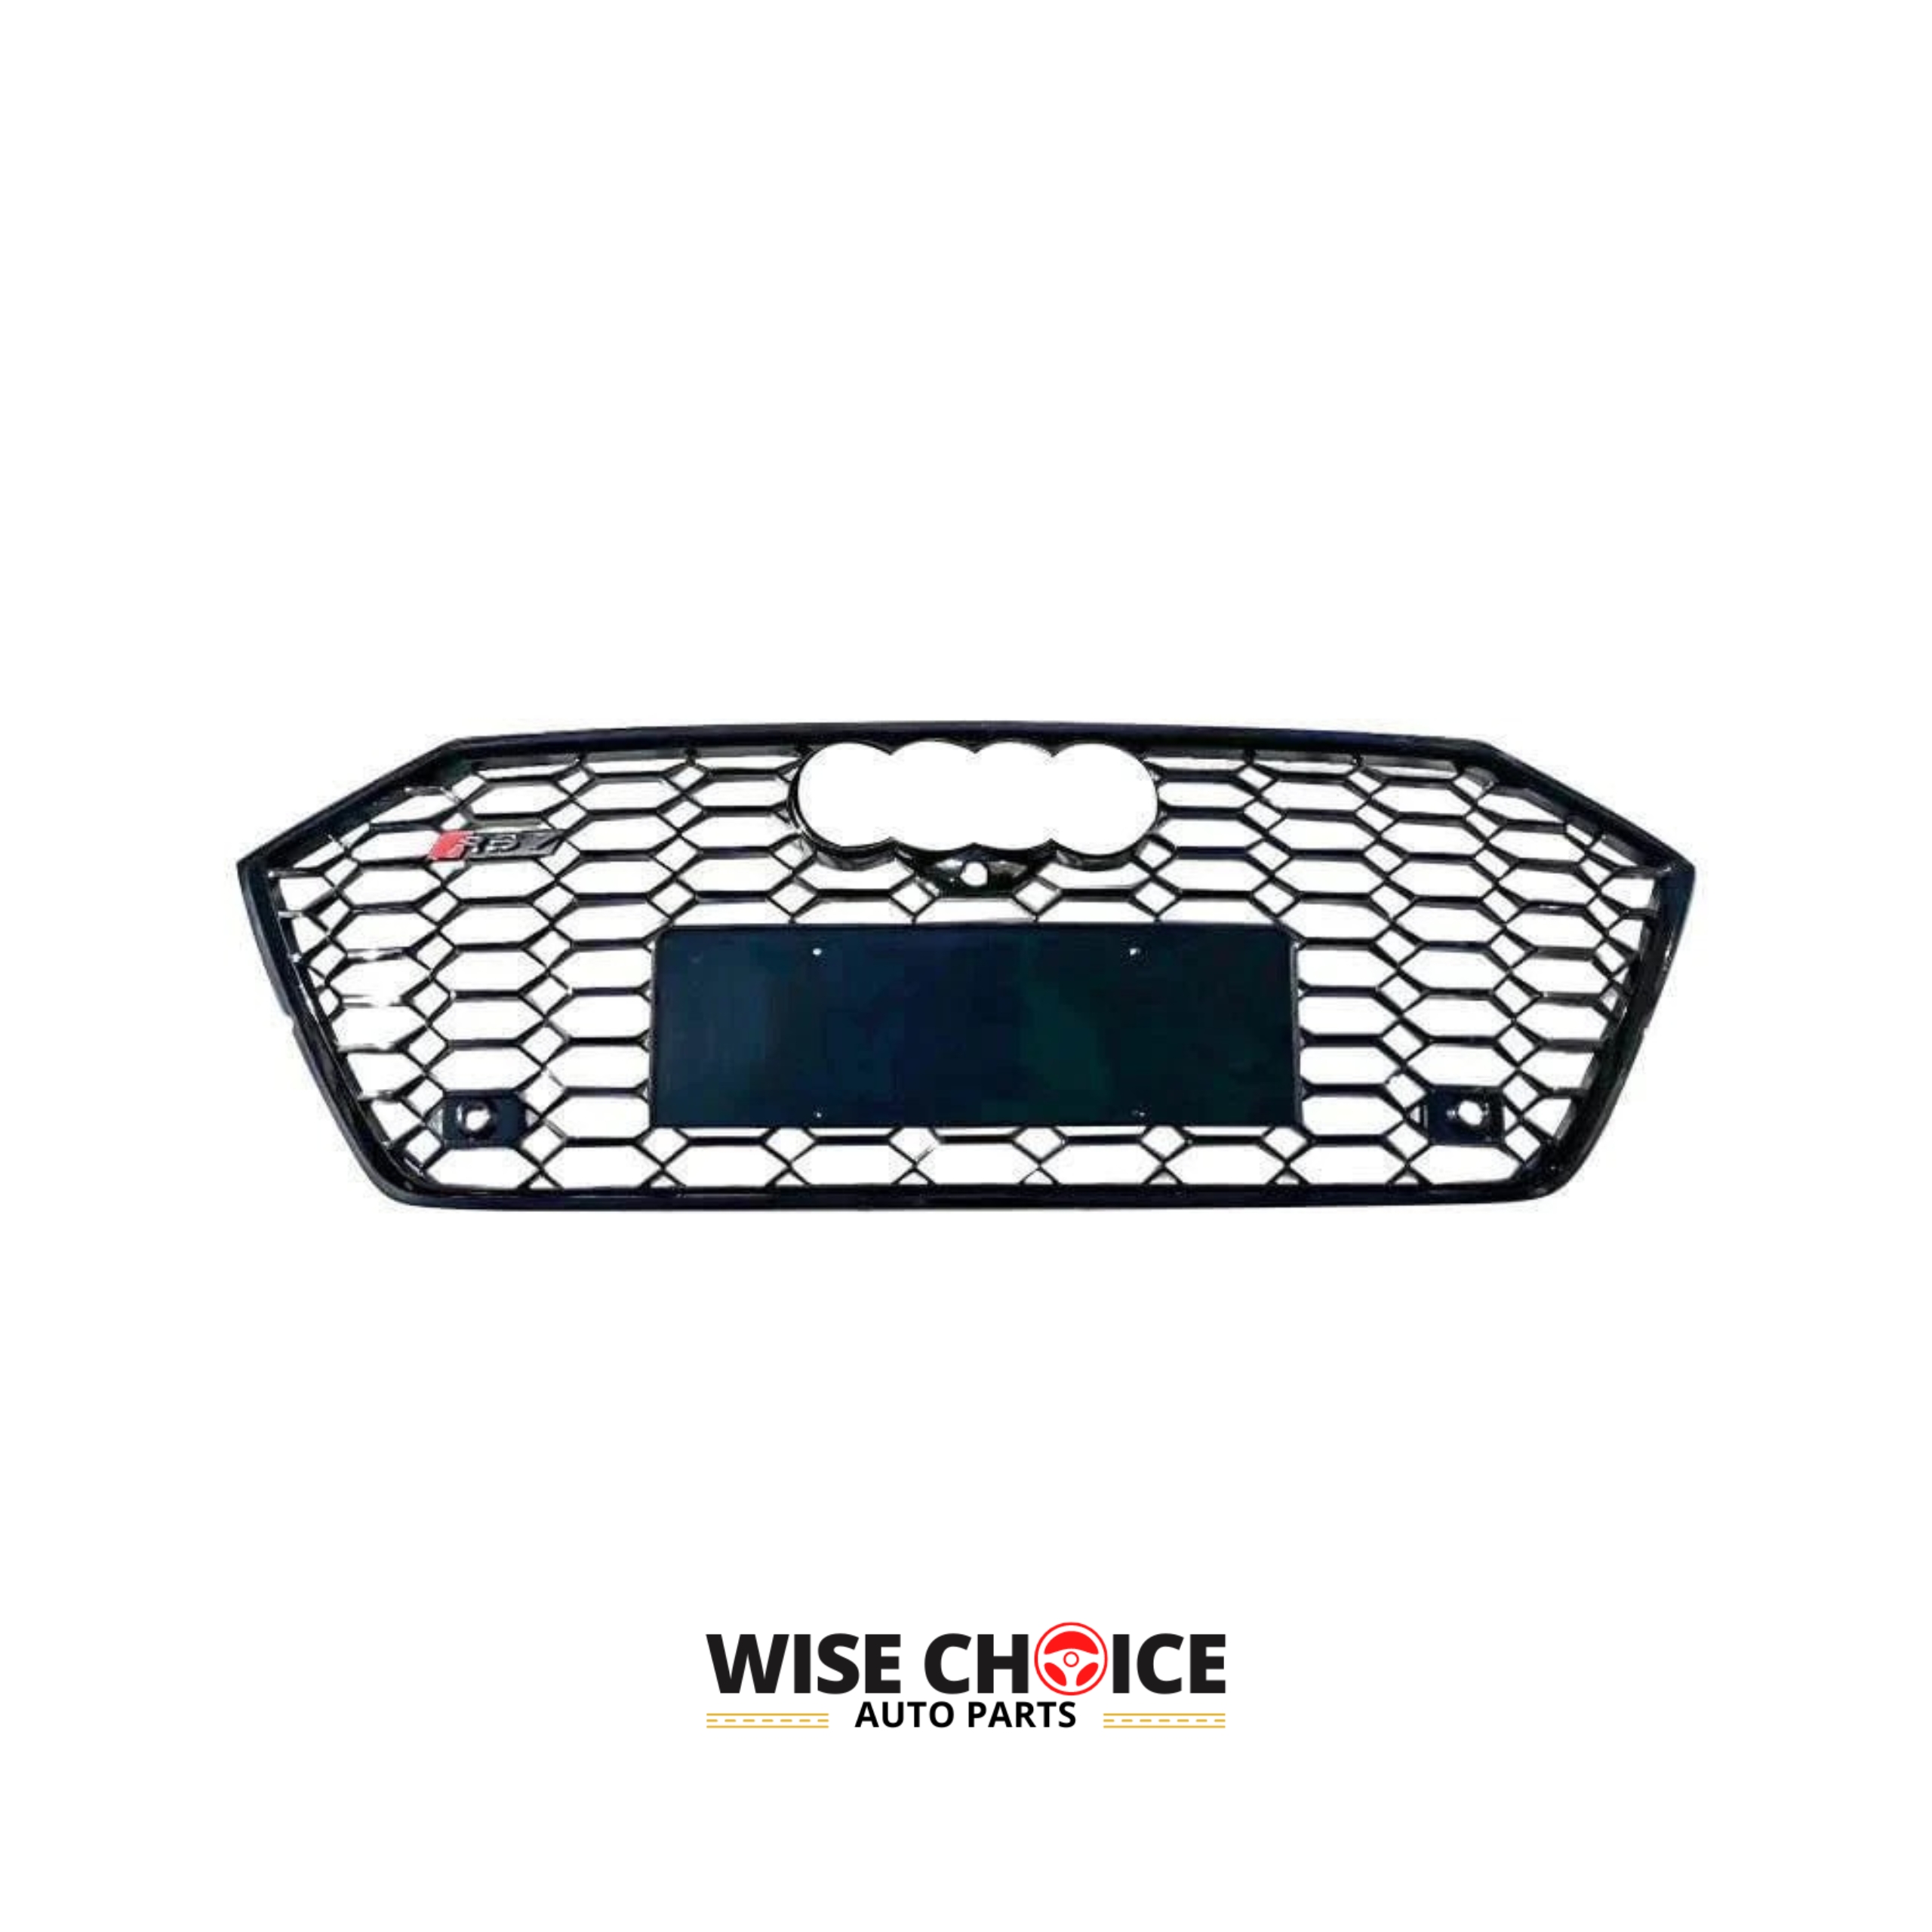 RS7 Style Honeycomb Front Grille fitted on a 2021 Audi C8 A7/S7